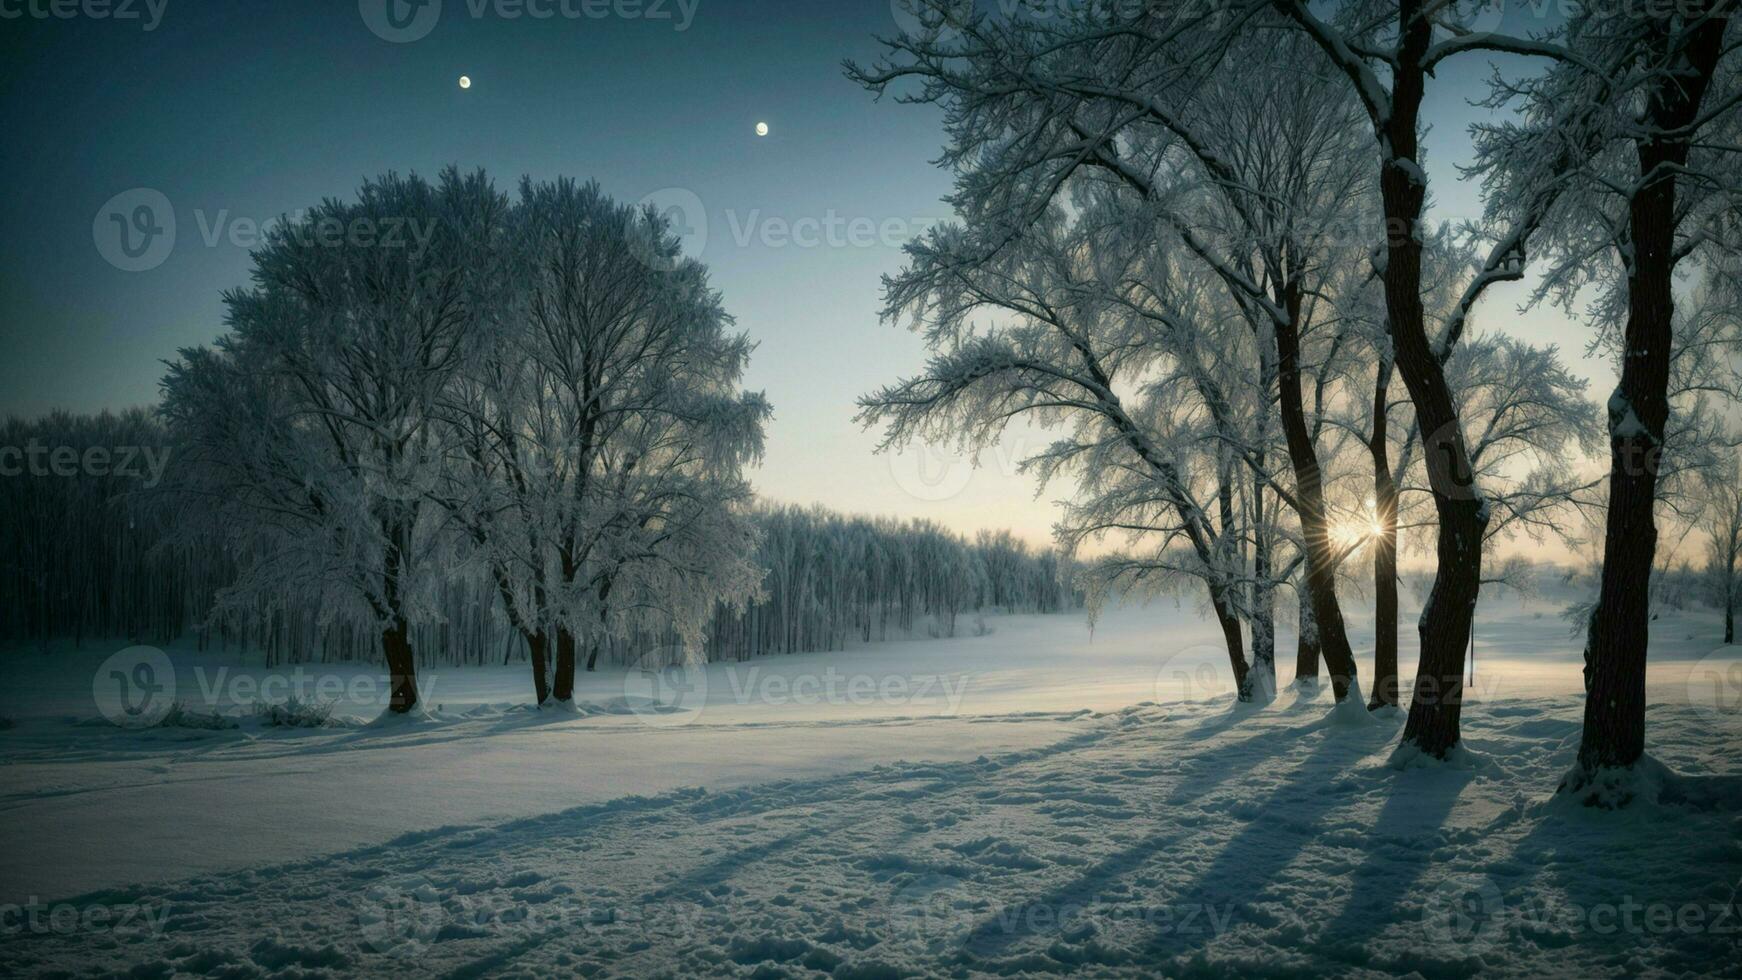 AI generated Depict the magical atmosphere created by moonlight filtering through the branches of winter trees, casting long shadows on the snow-covered ground and illuminating the frost photo